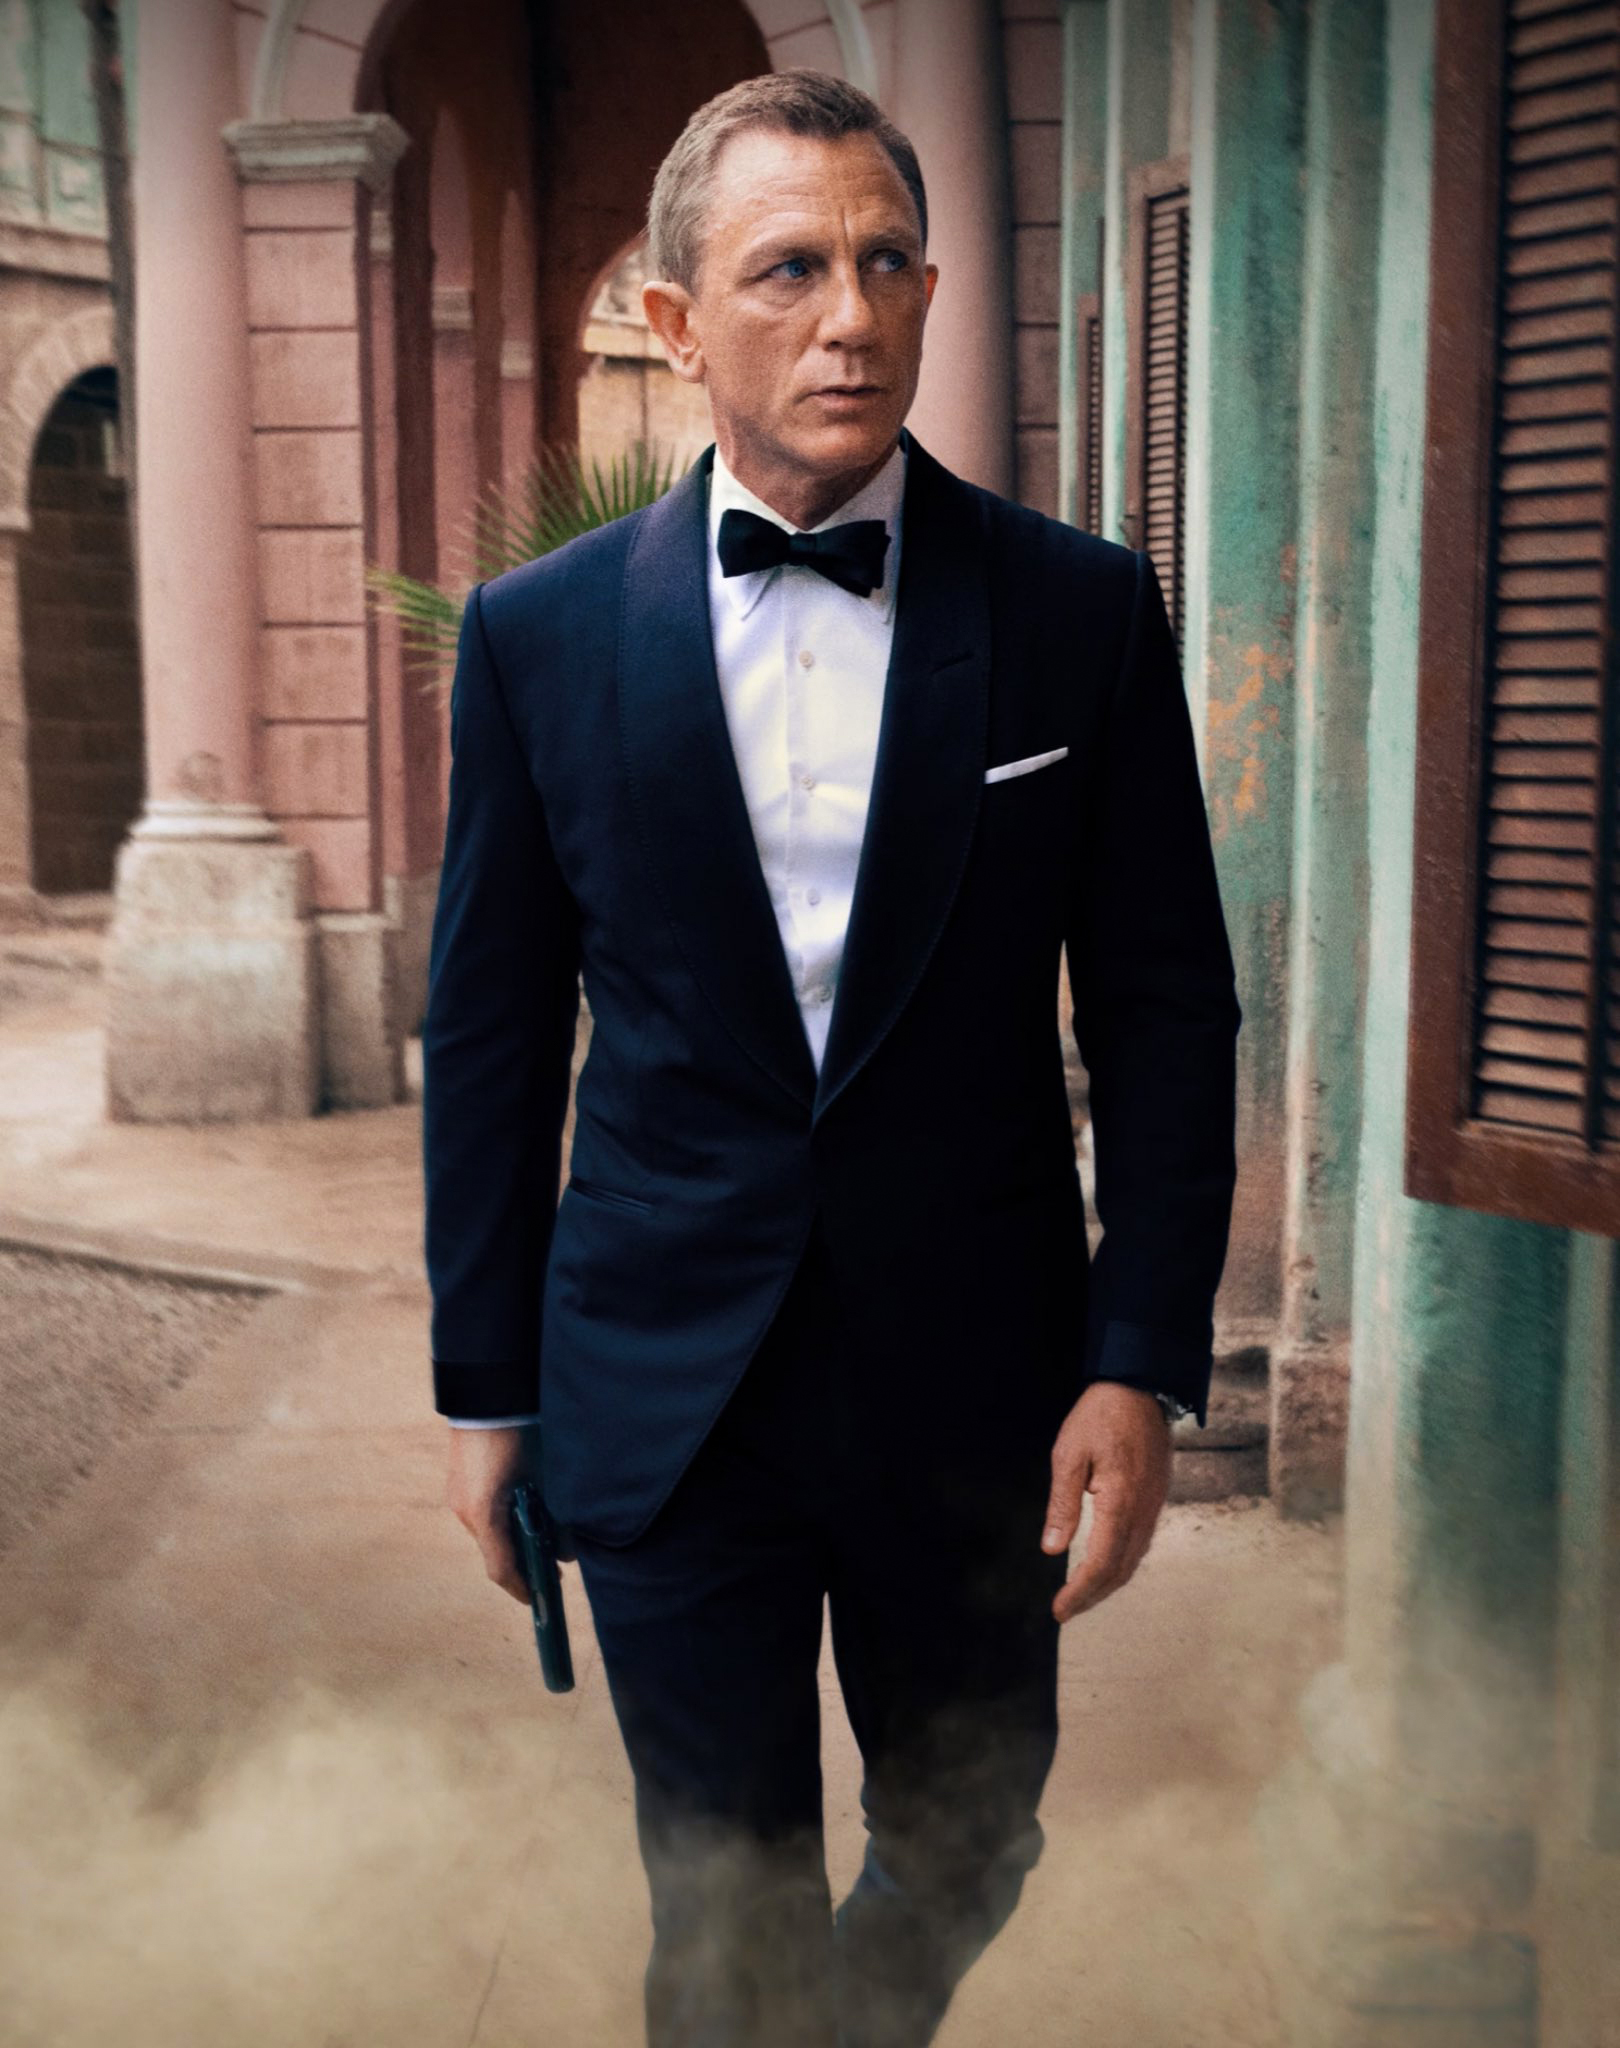 James Bond wears a black tuxedo in No Time To Die